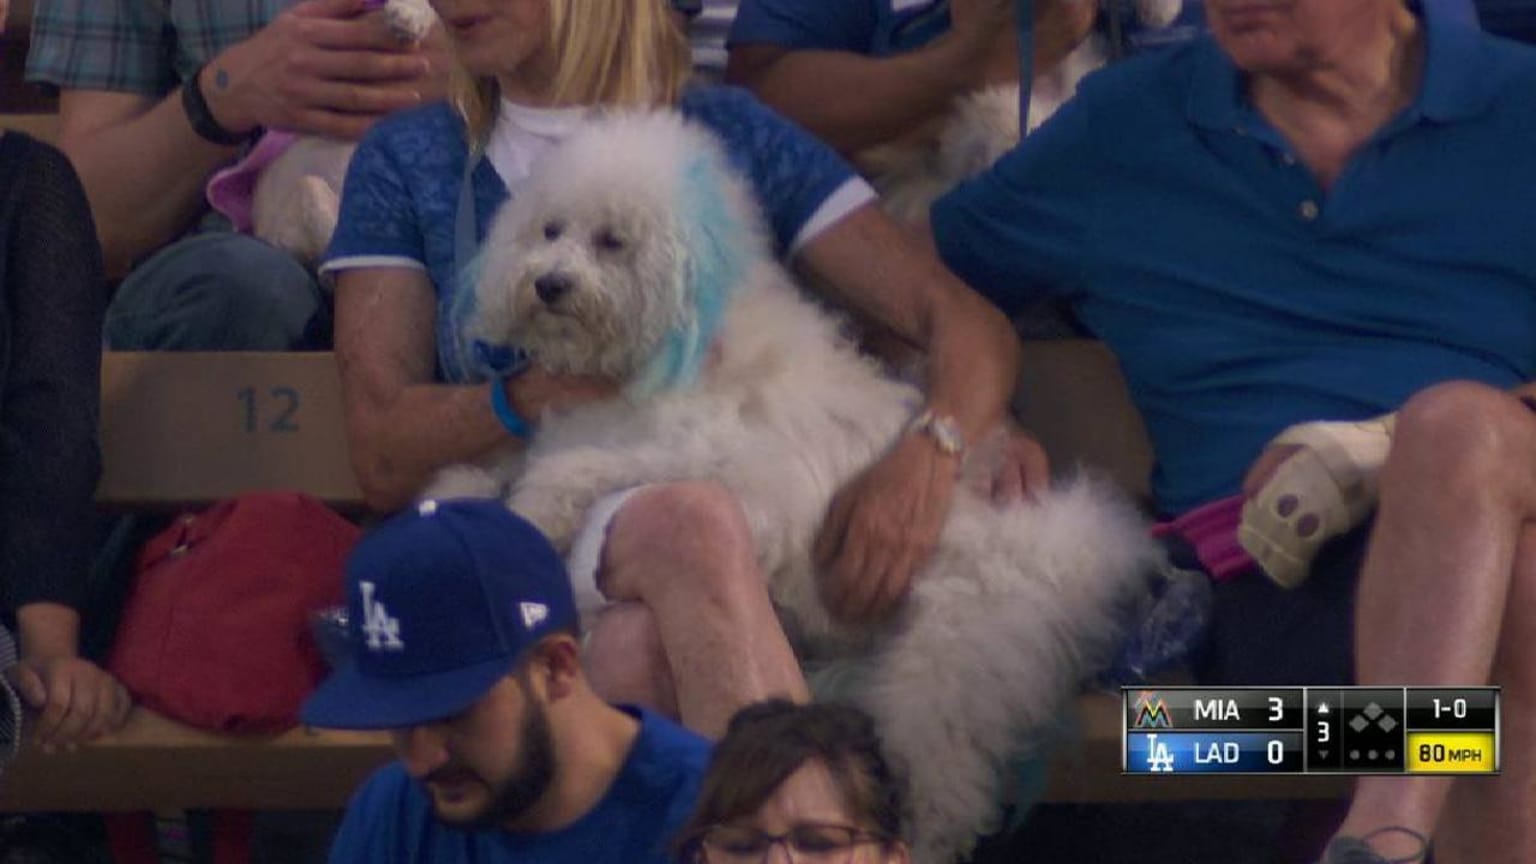 The Furry and Feathery Heroes of the Diamond: A Look into Baseball